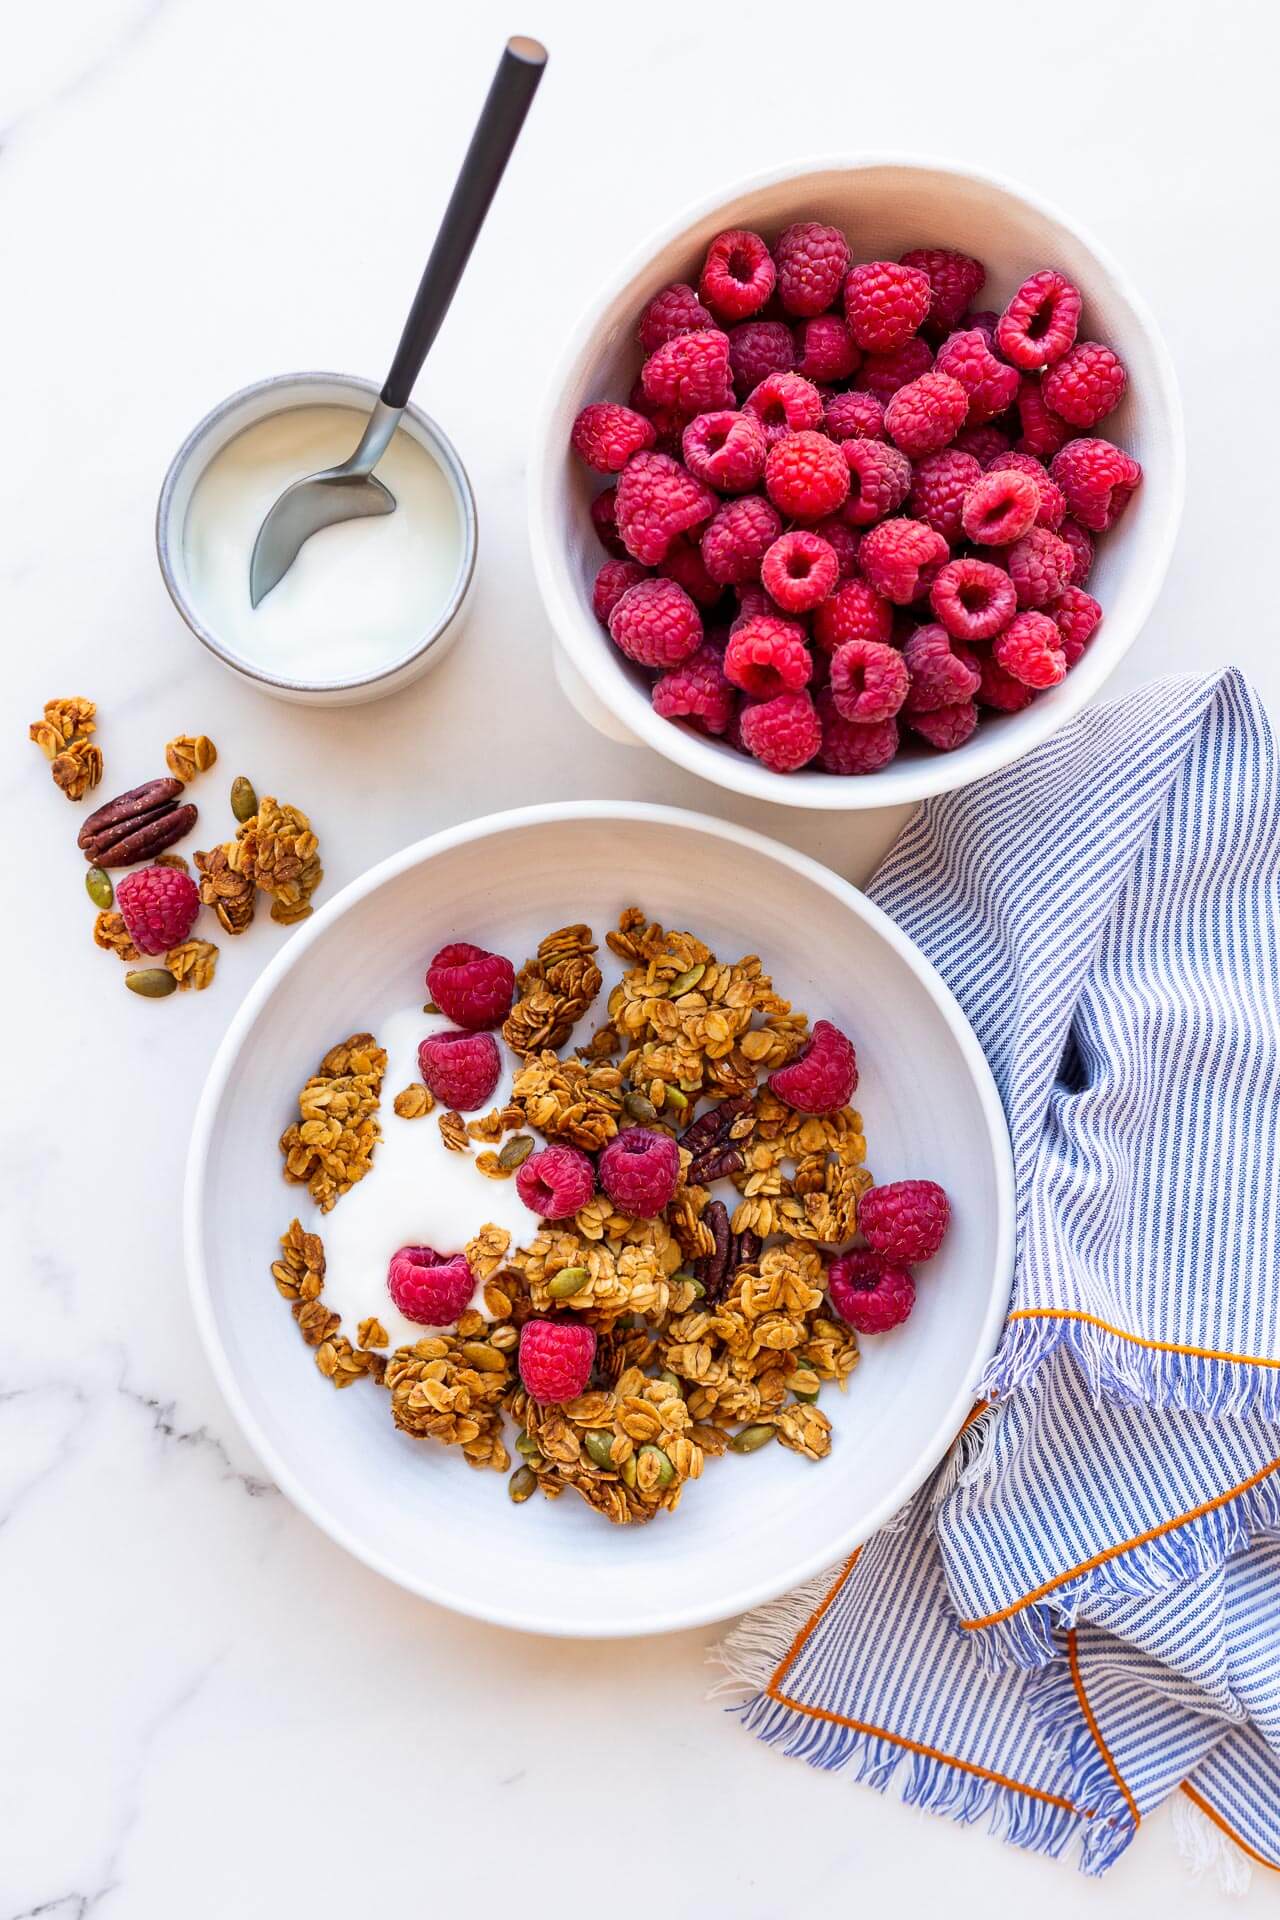 Bowl of granola clusters with yogurt and raspberries, striped linen napkin